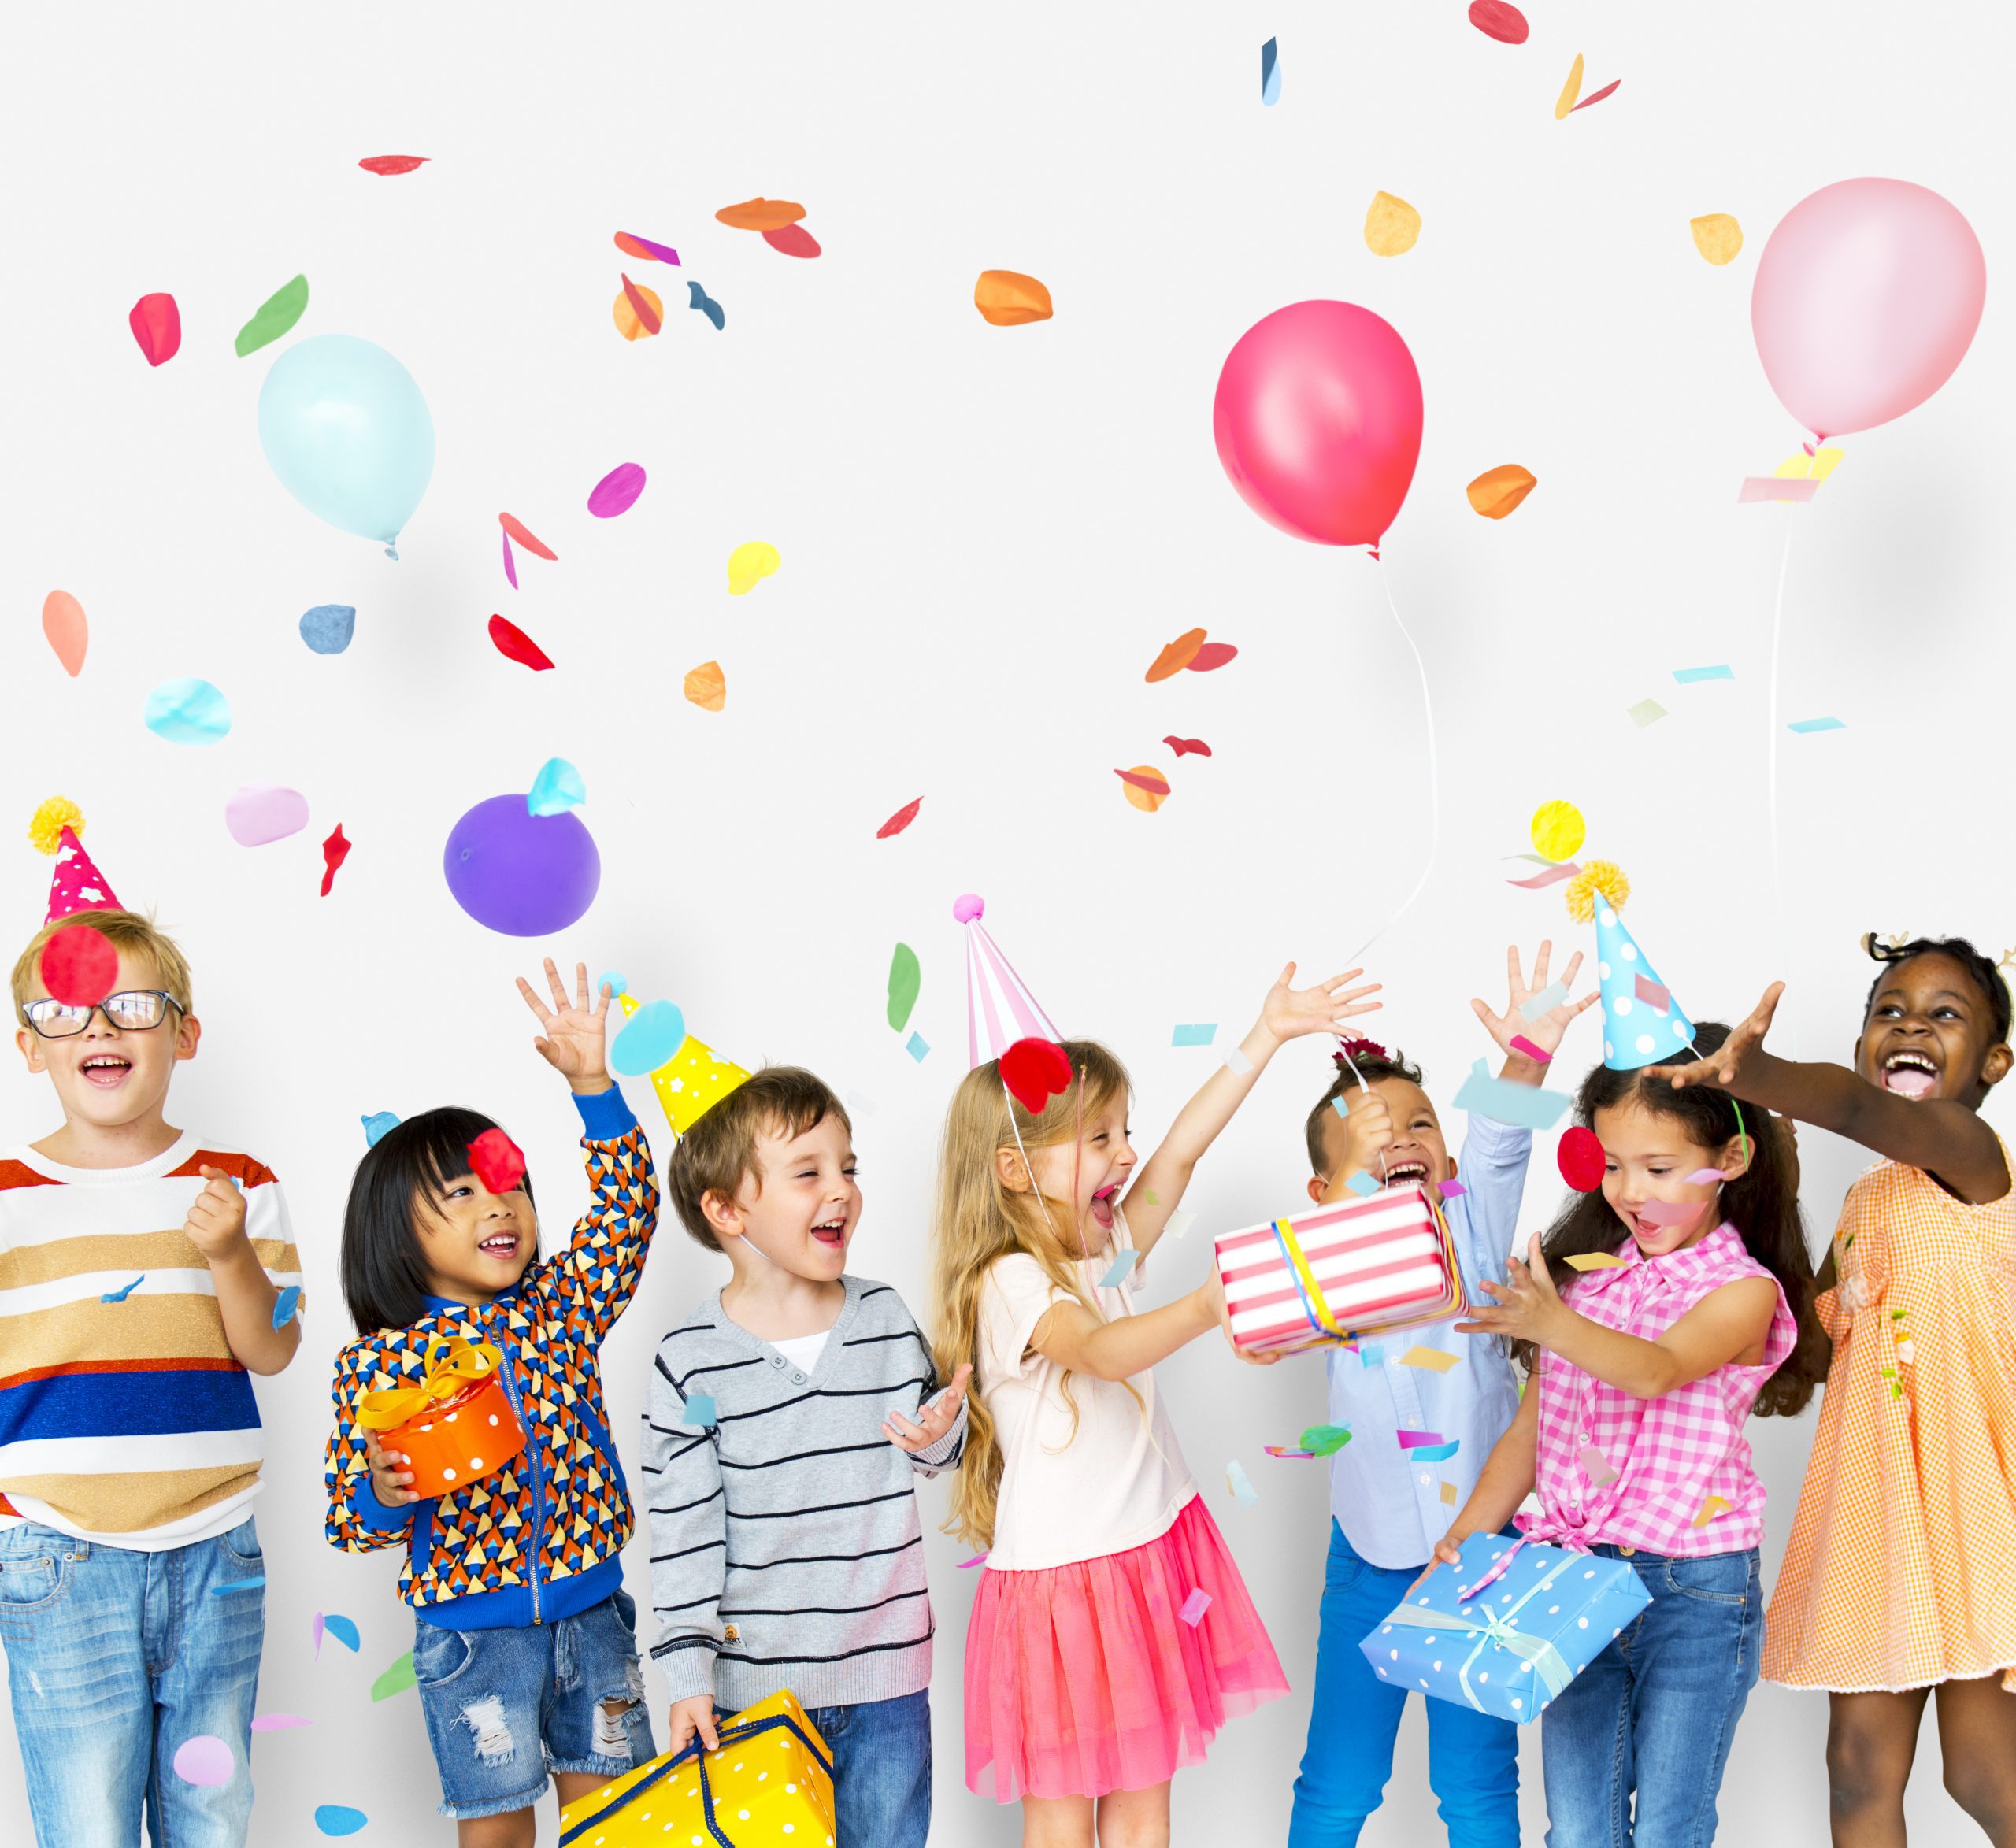 Group of kids celebrating a birthday party together